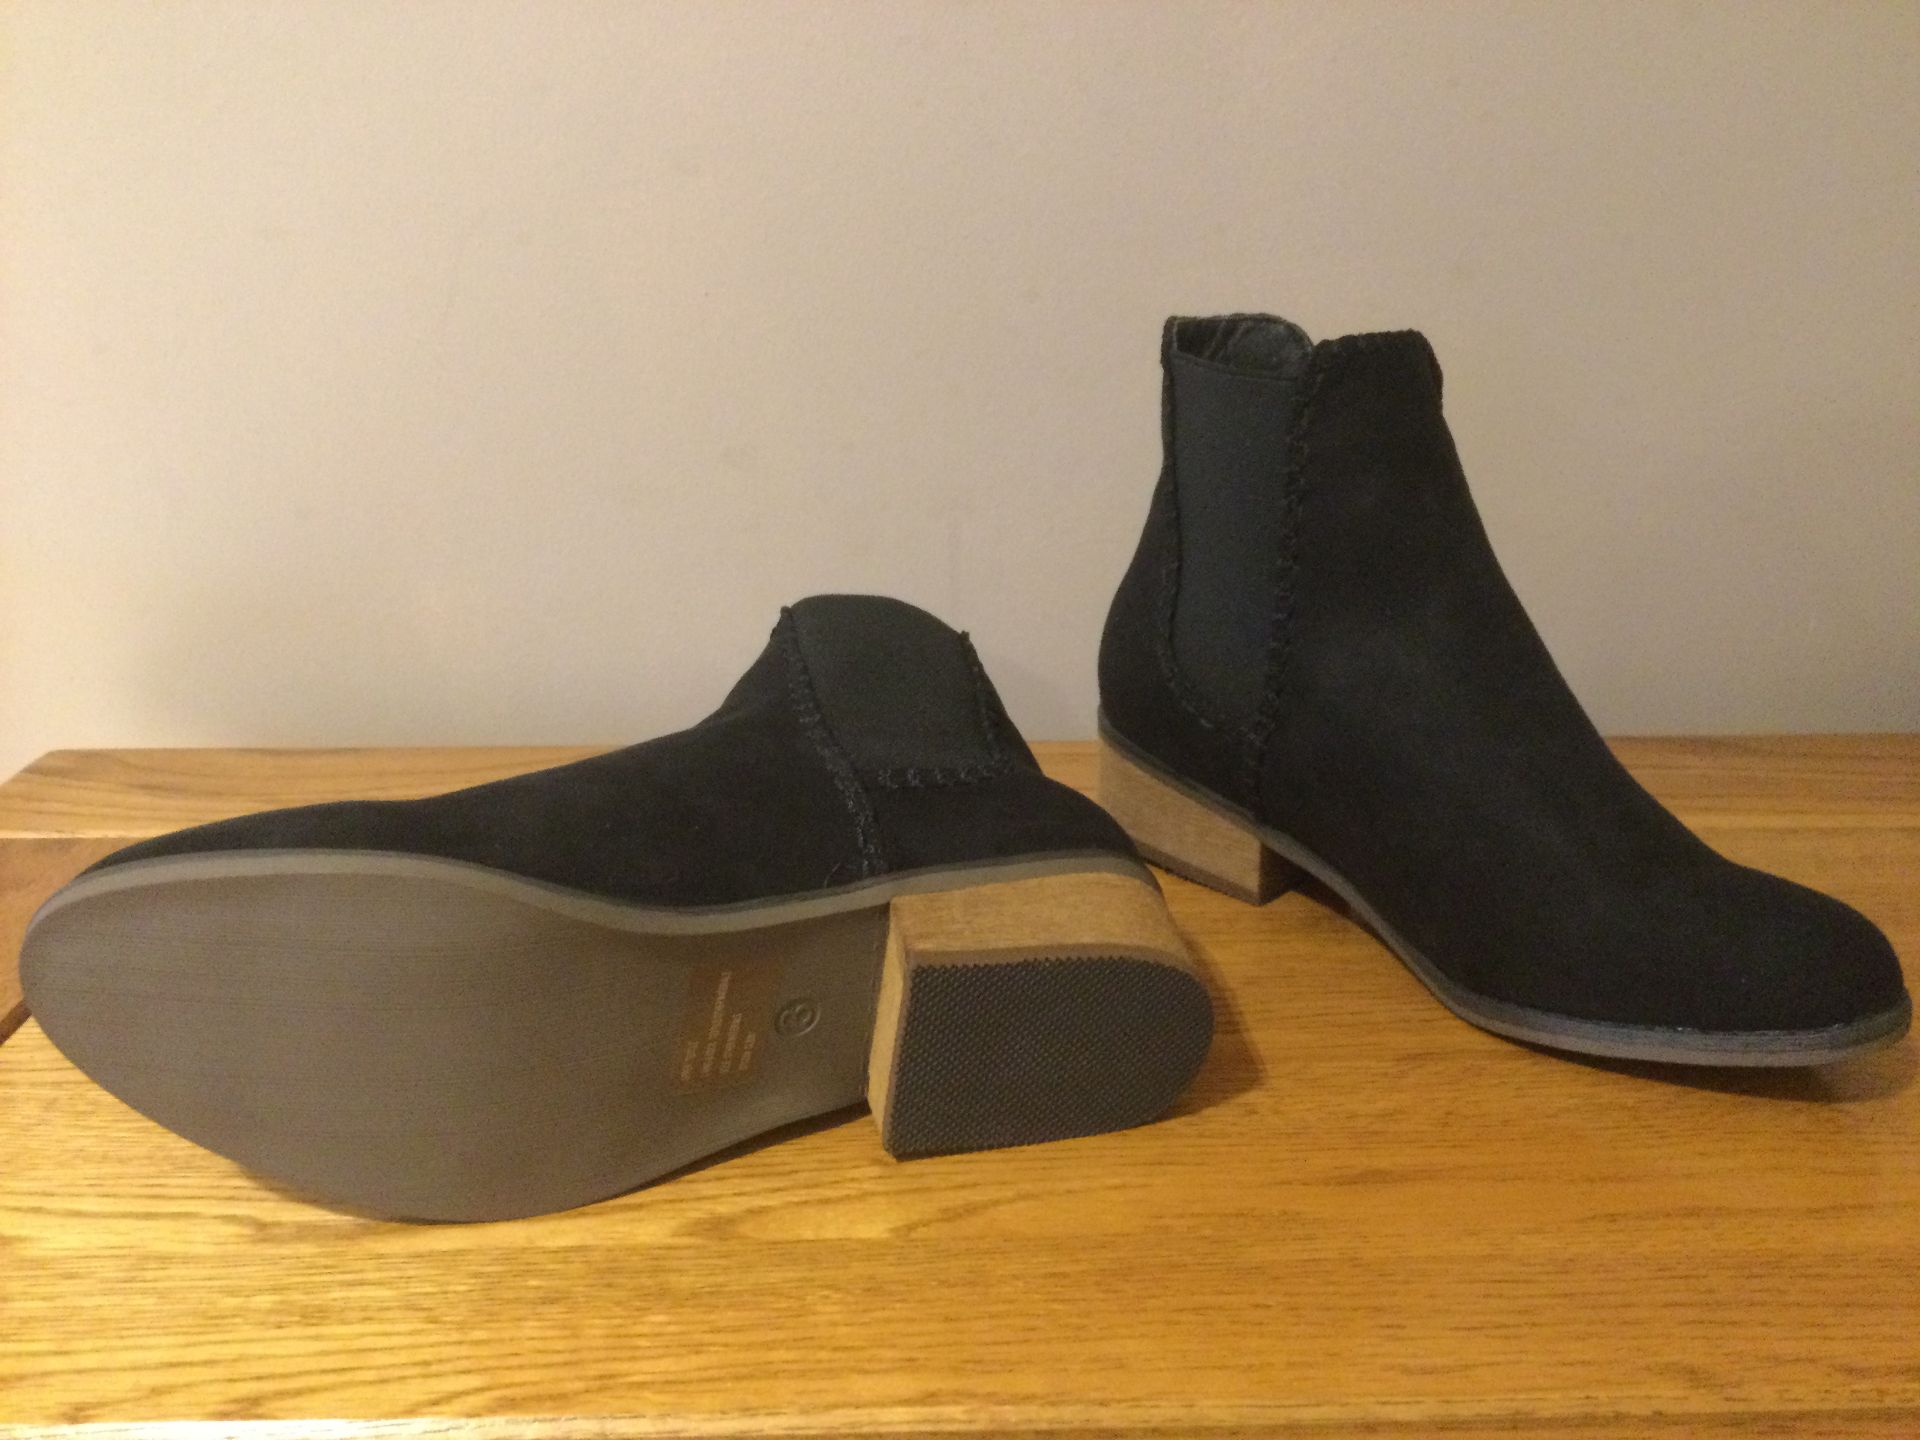 Dolcis “Pasha” Low Heel Ankle Boots, Size 4, Black - New RRP £45.99 - Image 2 of 6